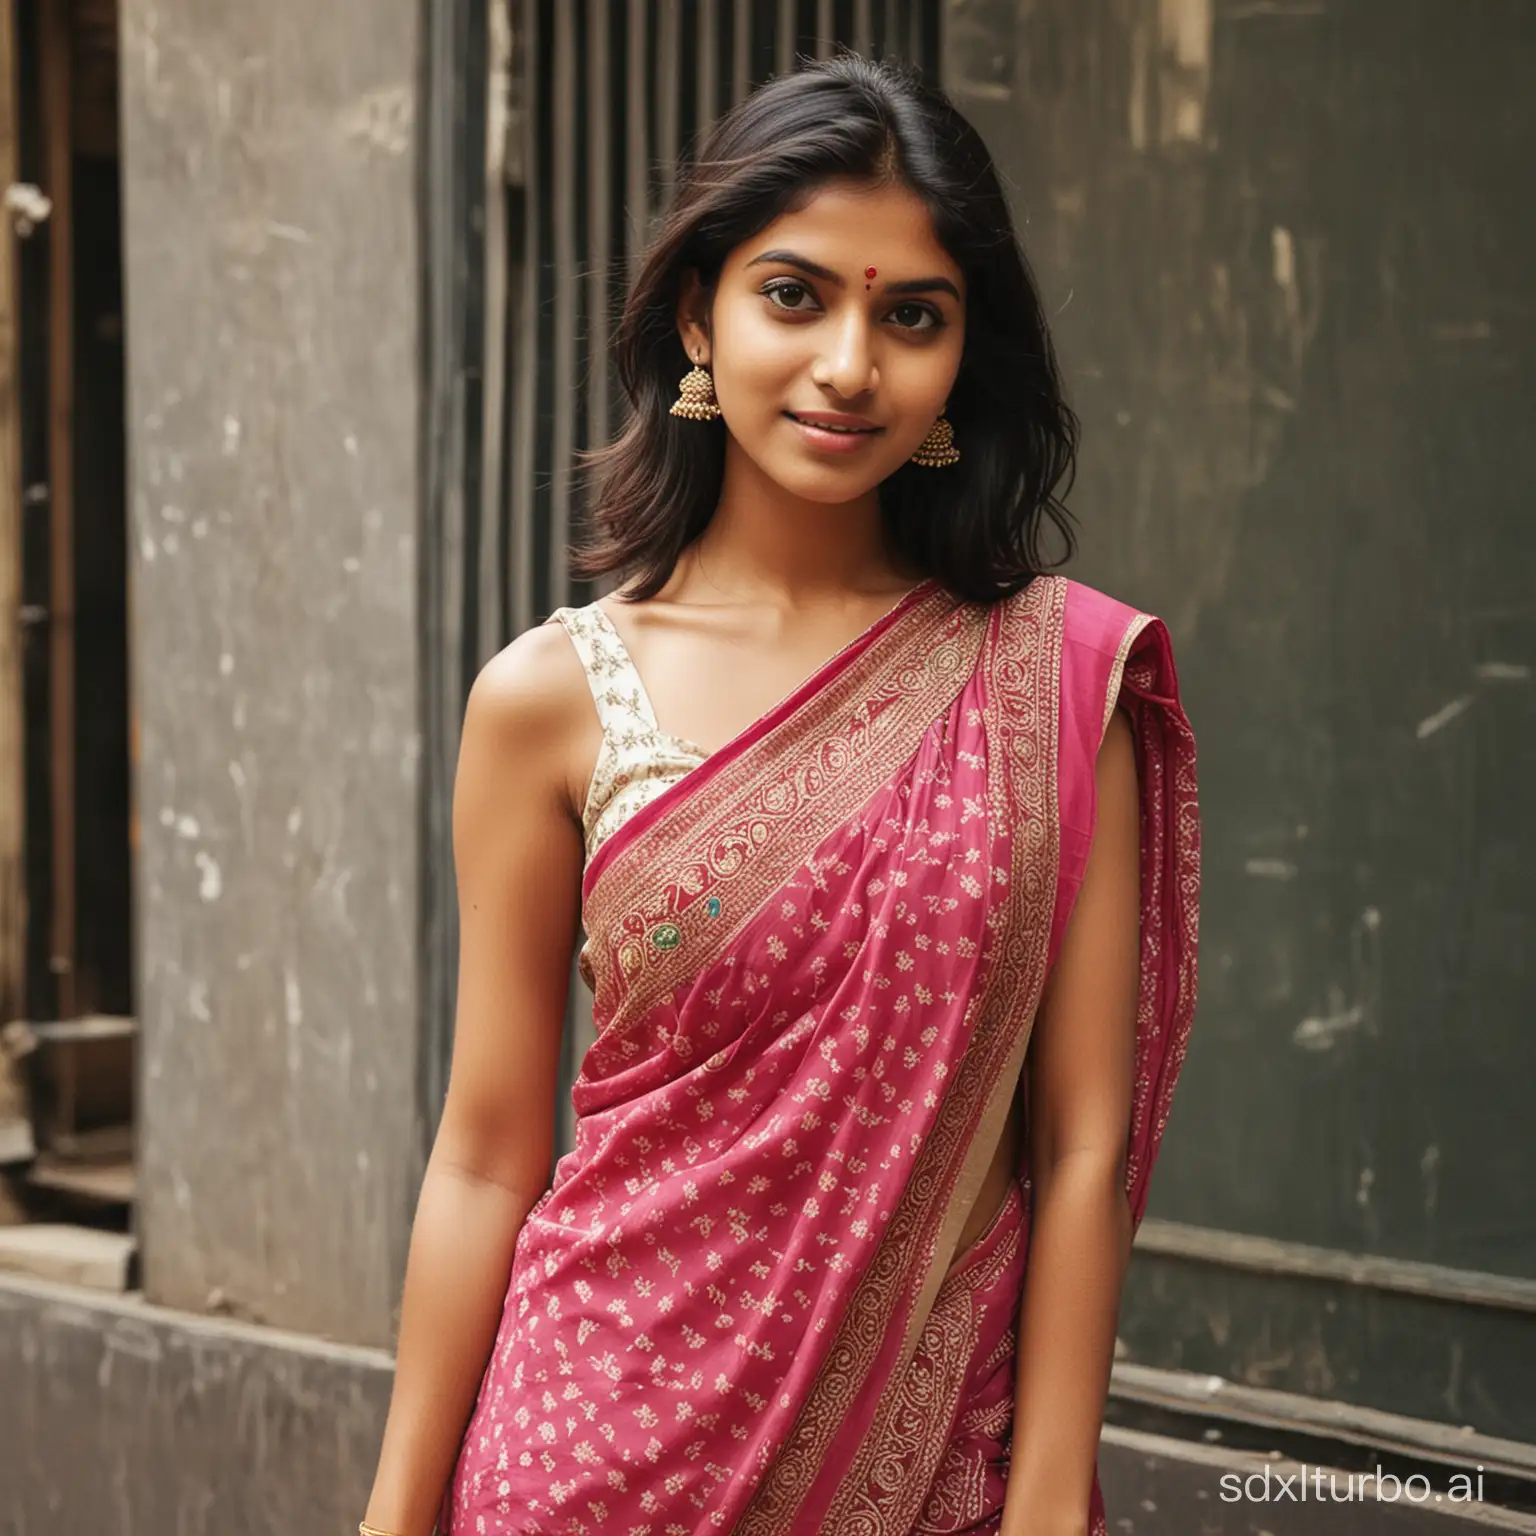 A modern Indian girl from South Bombay